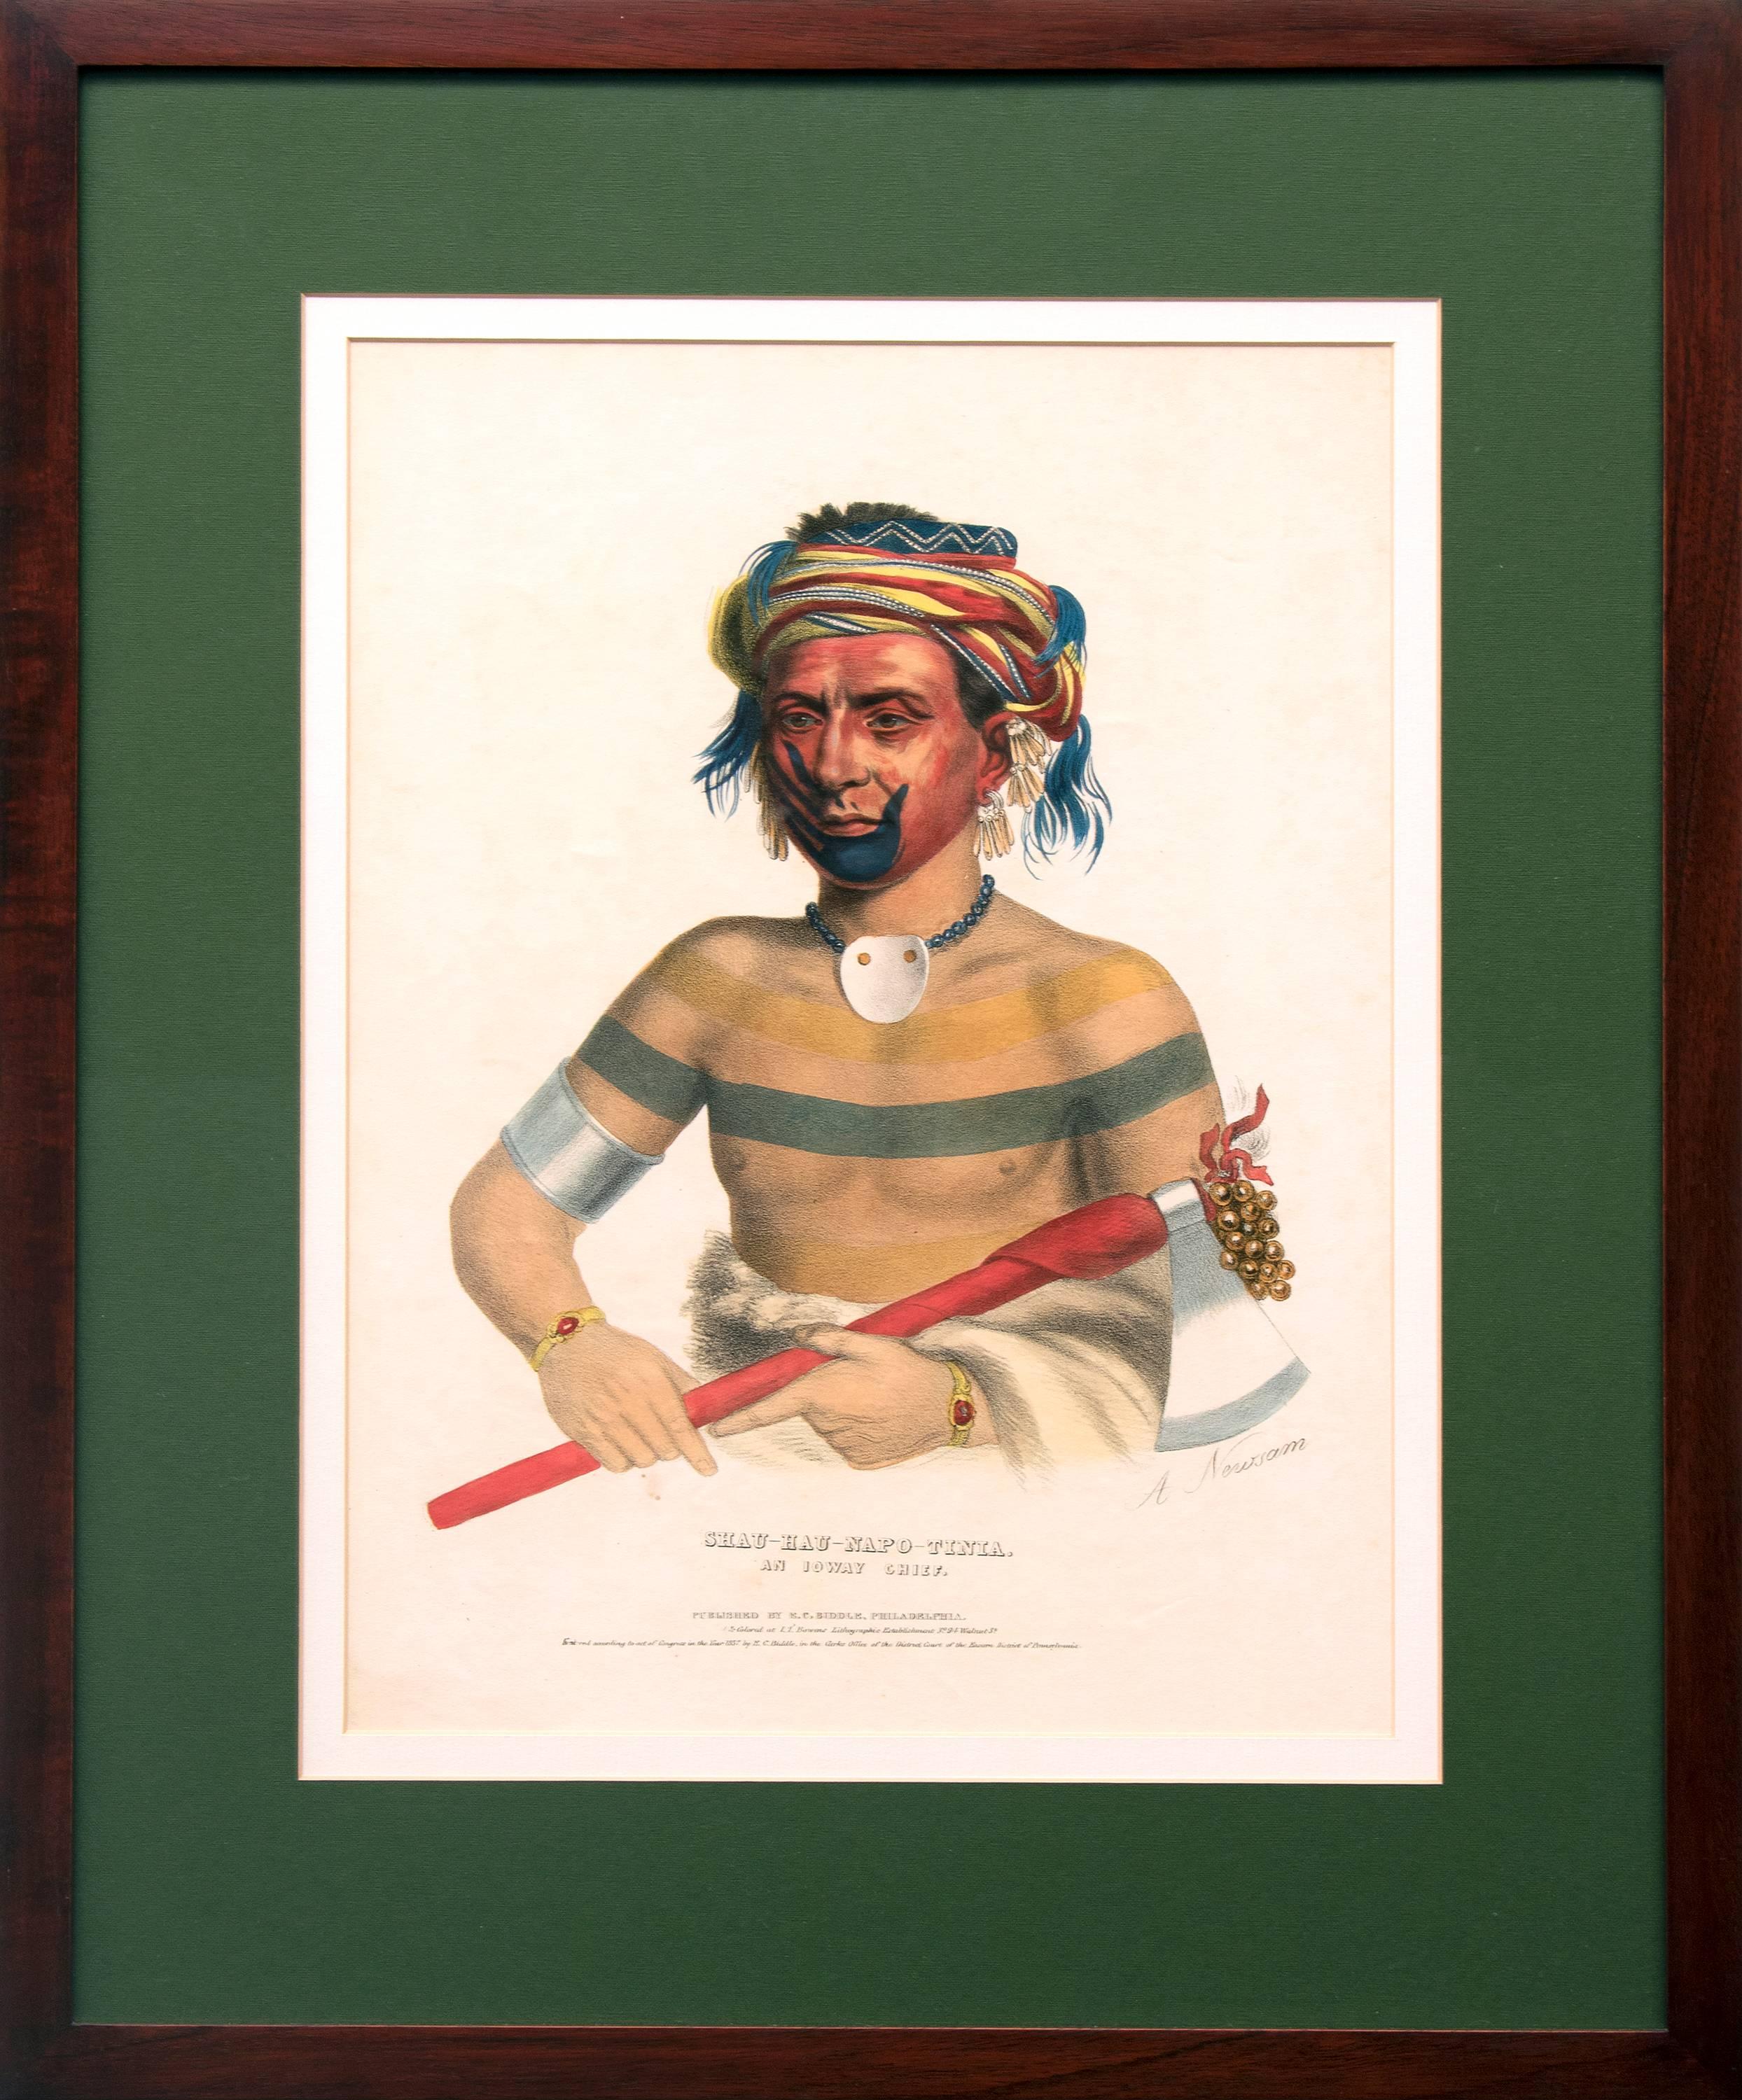 A collection of four vintage lithographs with custom frames (outer dimensions of each individual frame measures 24.25 x 20 x .75 inches. As displayed, the overall dimensions of the group of 4 measure 43 x 51.5 inches.

1) SHAU-HAU-NAPO-TINTA - An